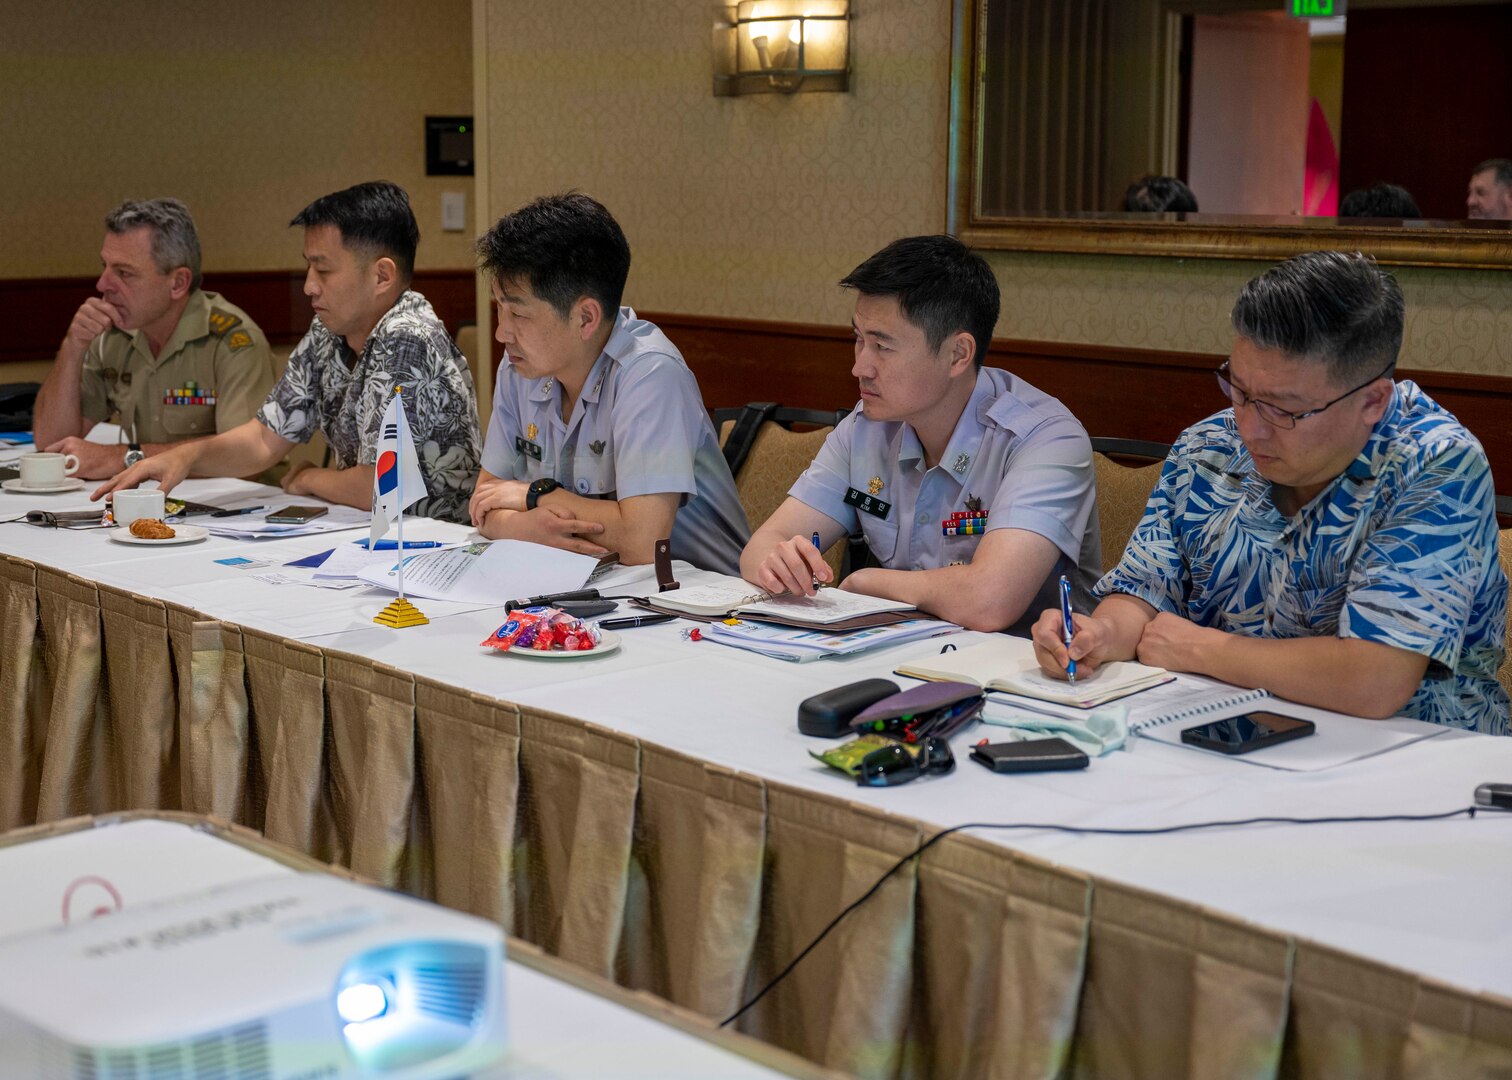 HONOLULU (Feb. 7, 2023) The Peacekeeping Operations Coordination Board – Technical Working Group, consisting of representatives from Australia, Canada, France, Japan, Republic of Korea, New Zealand, United Kingdom, and the United States, held its 10th multinational coordination meeting Feb. 7-9, 2023 in Honolulu, Hawaii as part of the U.S. Global Peace Operations Initiative (GPOI) on behalf of United States Indo-Pacific Command. USINDOPACOM is committed to enhancing stability in the Asia-Pacific region by promoting security cooperation, encouraging peaceful development, responding to contingencies, deterring aggression, and, when necessary, fighting to win. (U.S. Navy photo by Mass Communication Specialist 3rd Class Christopher Thomas)